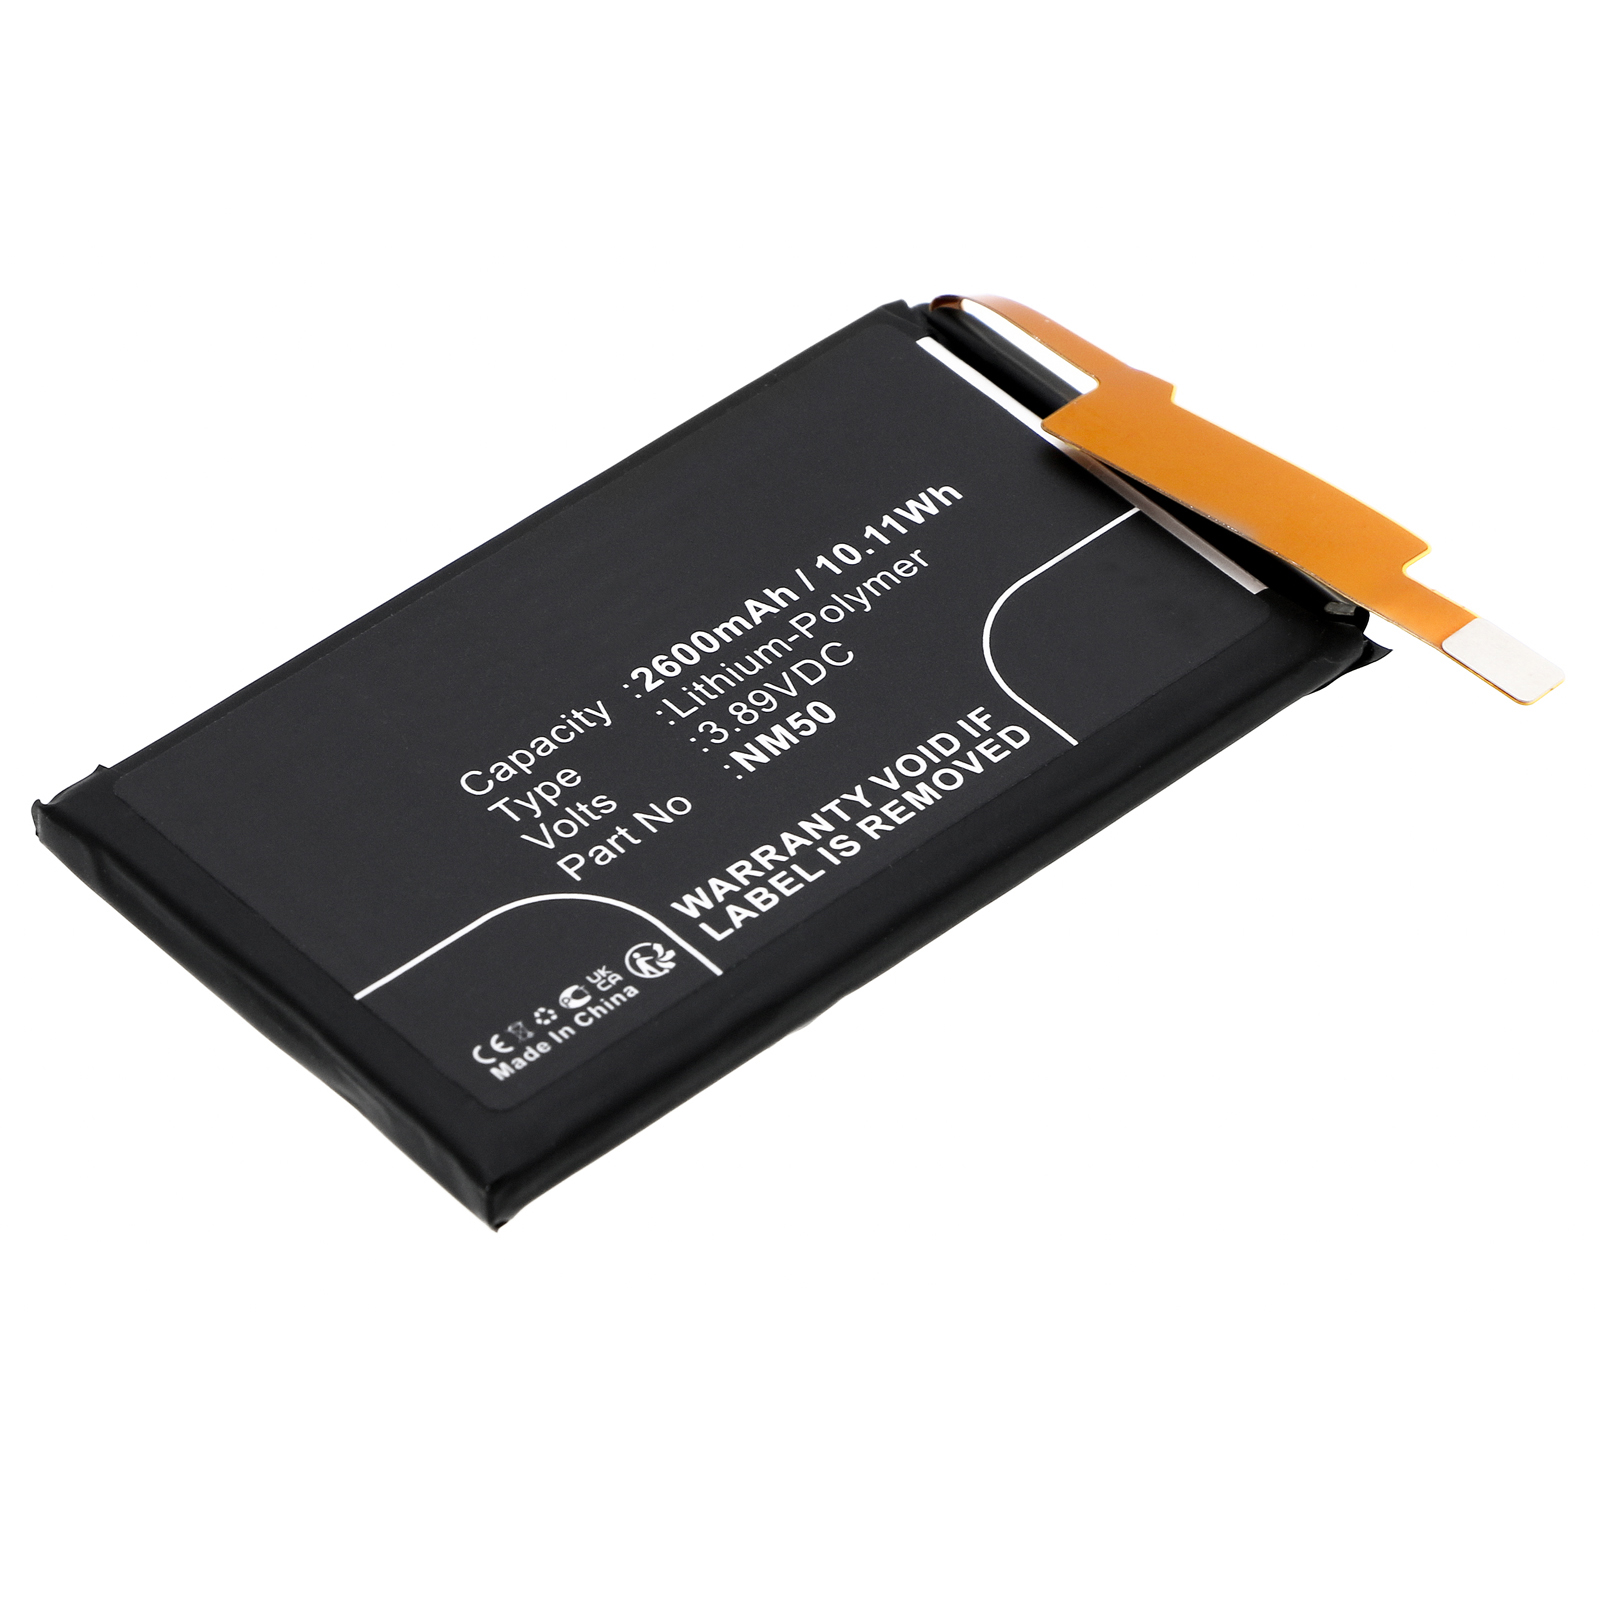 Synergy Digital Cell Phone Battery, Compatible with Motorola NM50 Cell Phone Battery (Li-Pol, 3.89V, 2600mAh)